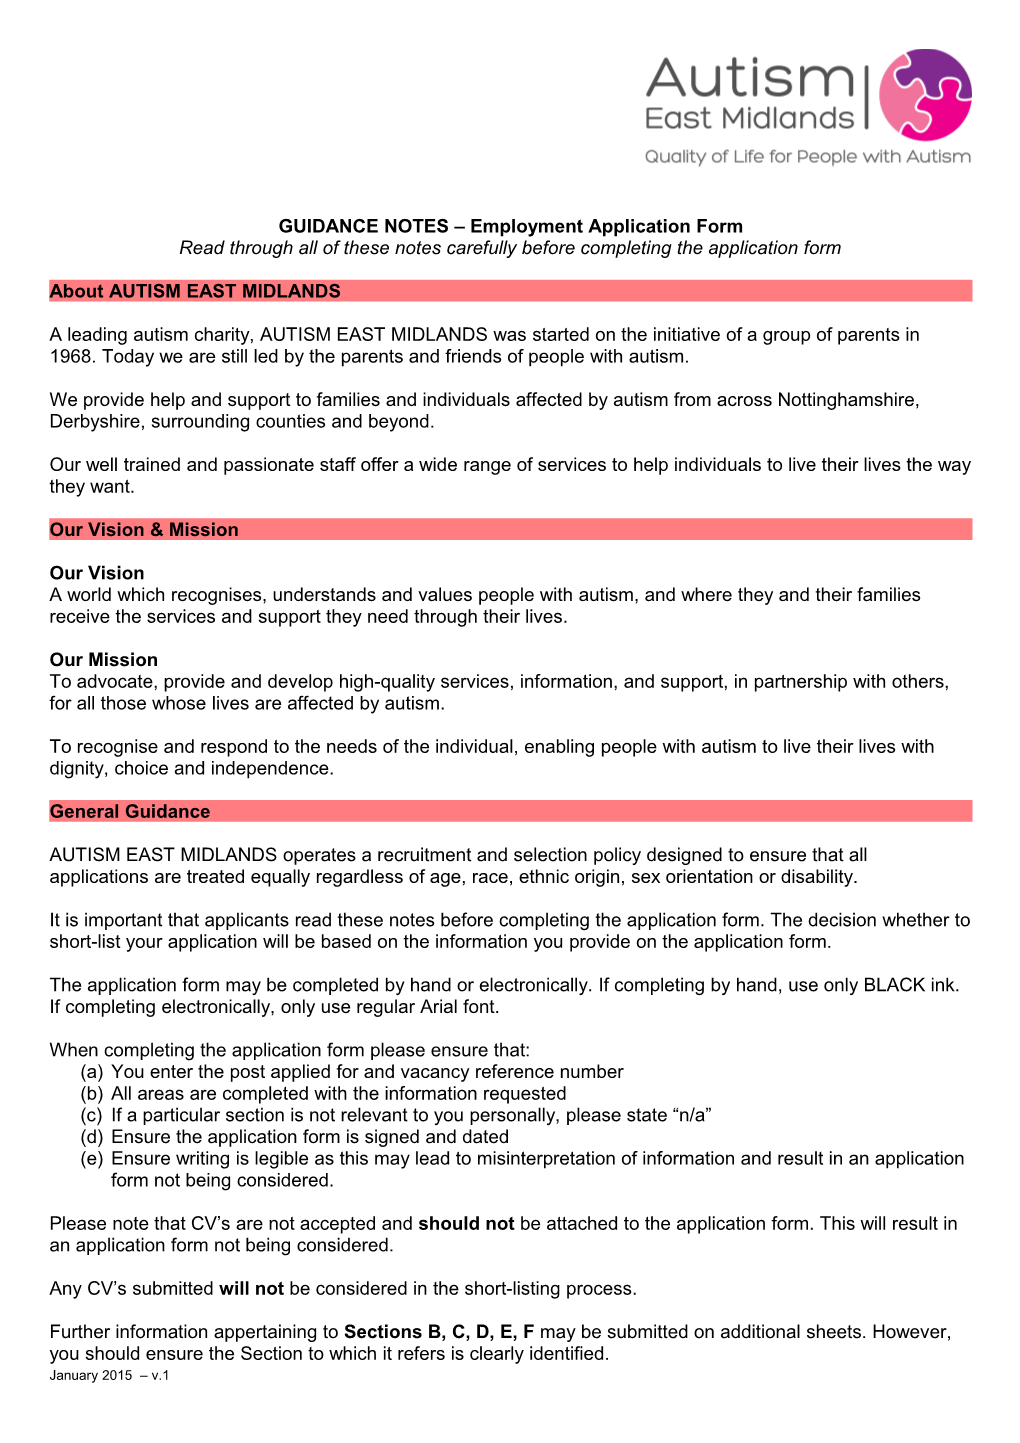 GUIDANCE NOTES Employment Application Form